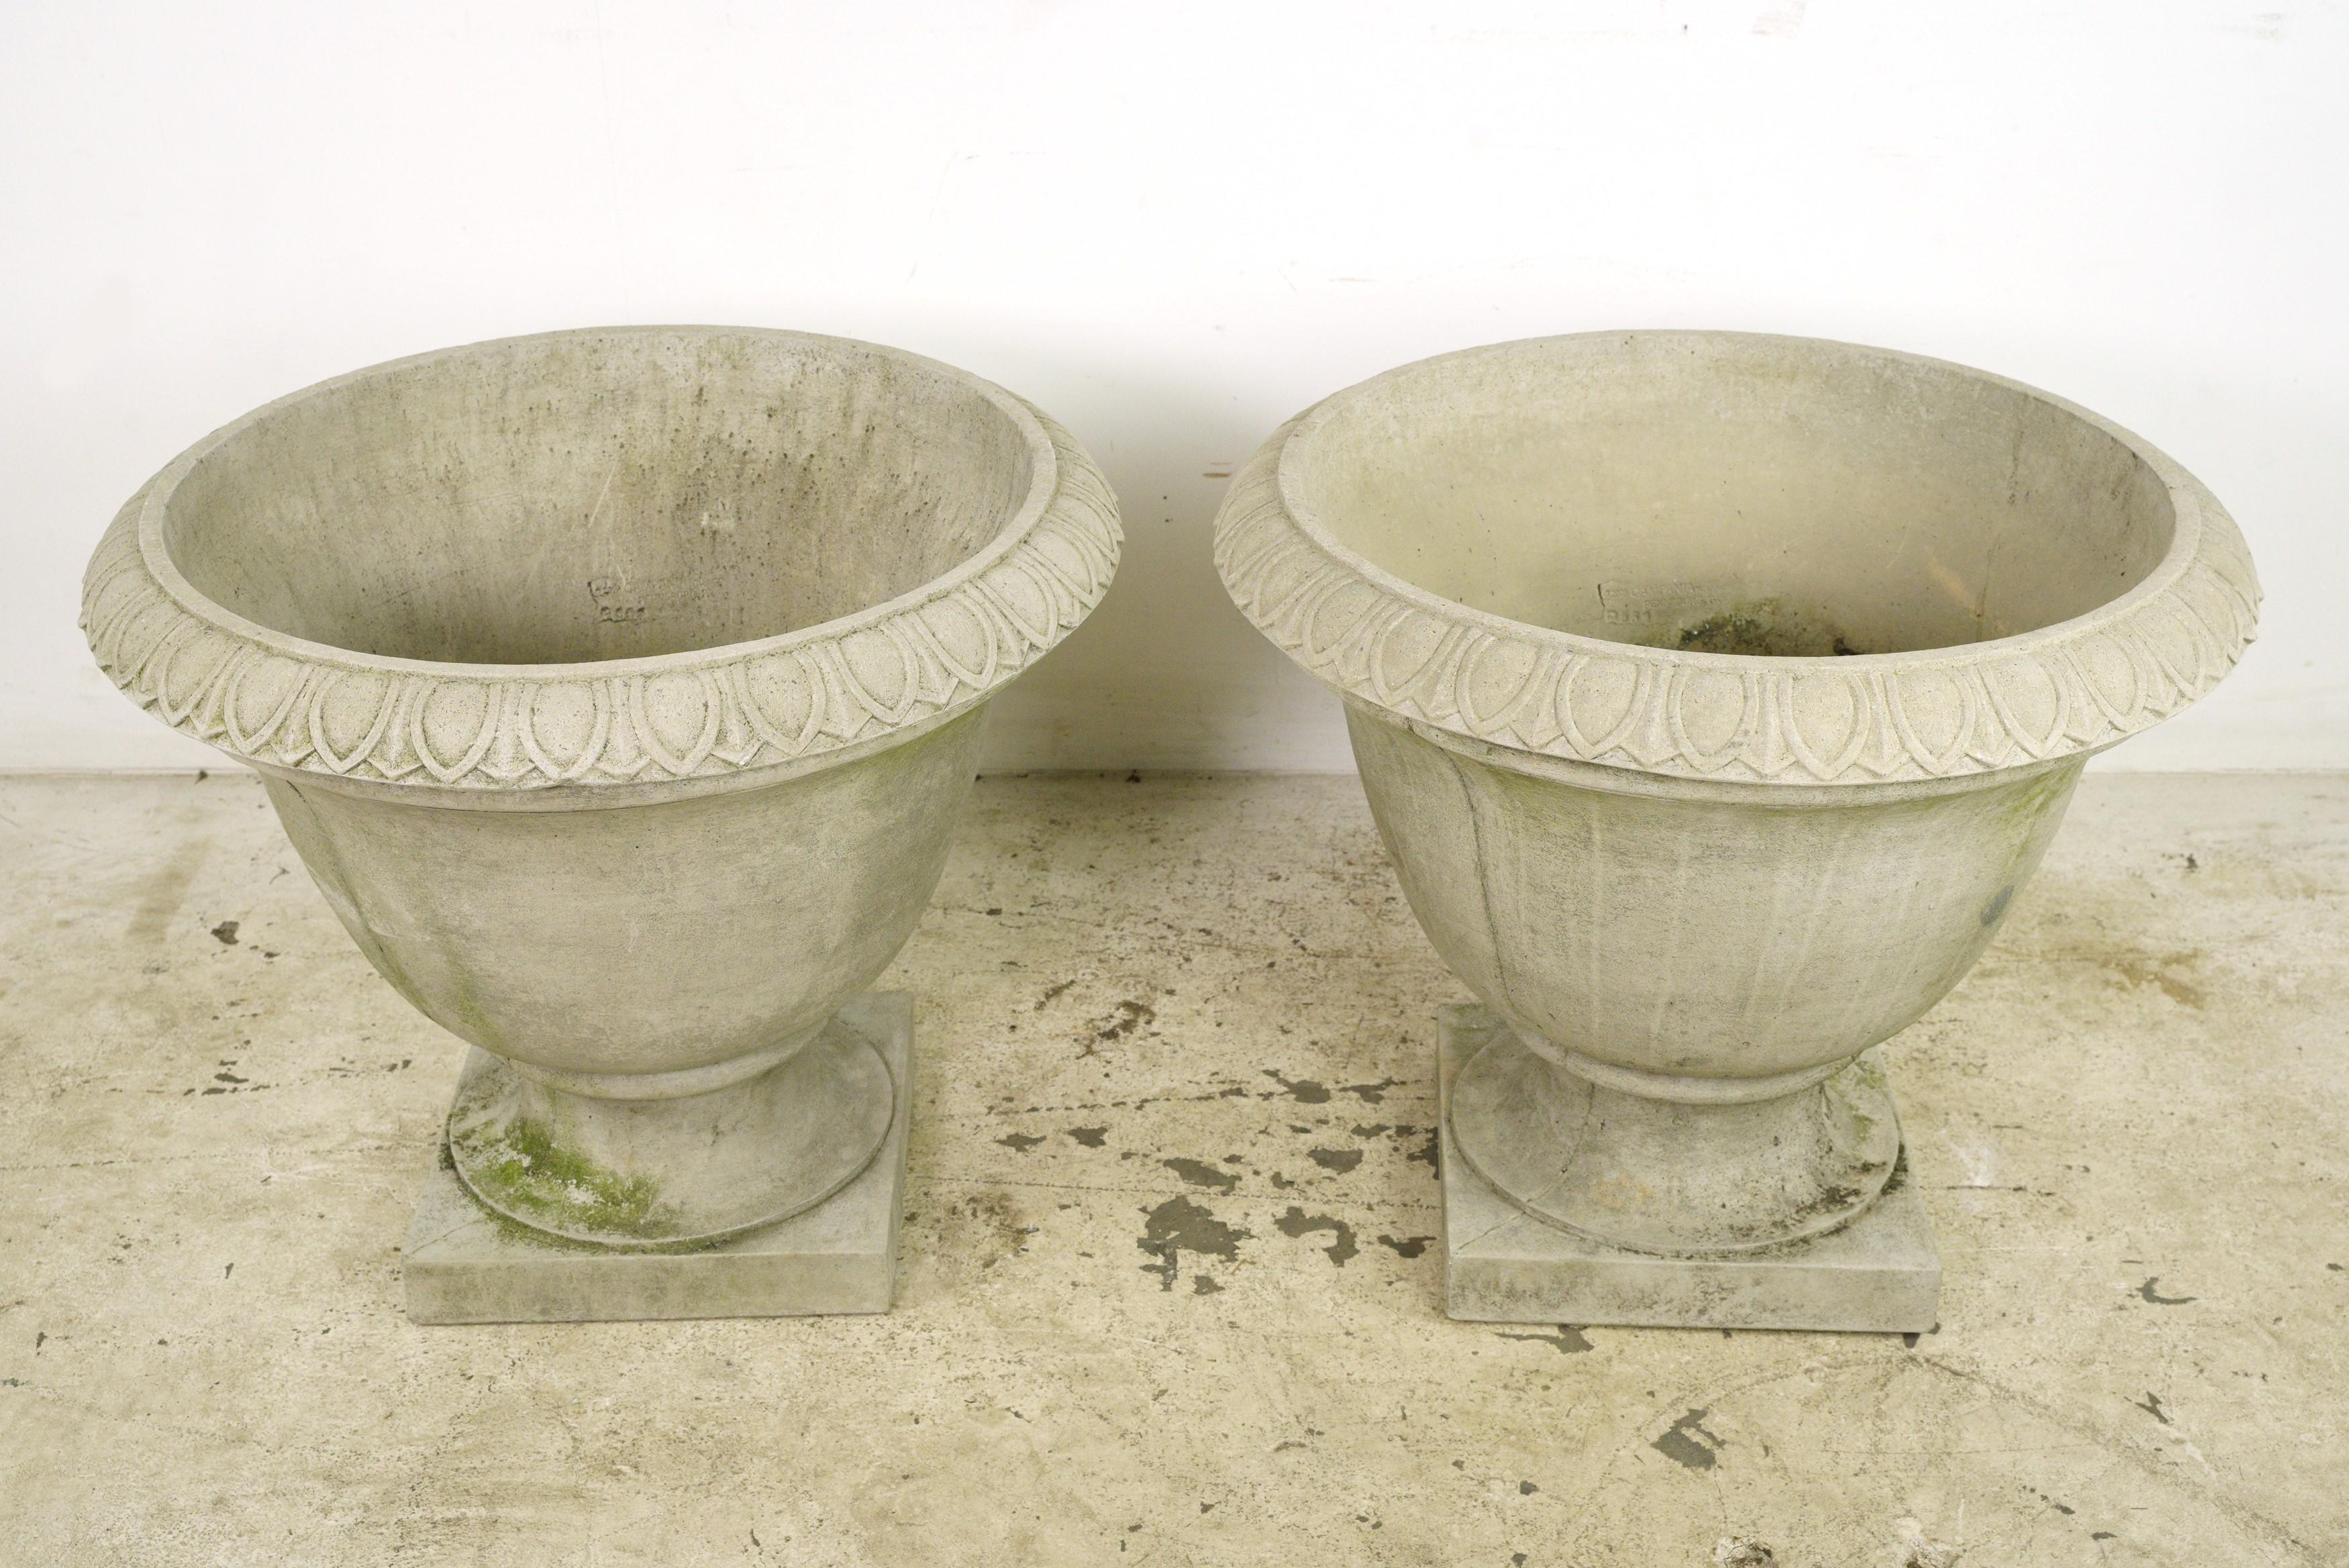 This pair was procured from an esteemed estate located in Greenwich, Connecticut. These urn-shaped planters feature distinctive egg and dart trim detailing. Crafted from durable concrete, they provide a sturdy foundation for planting. They are in